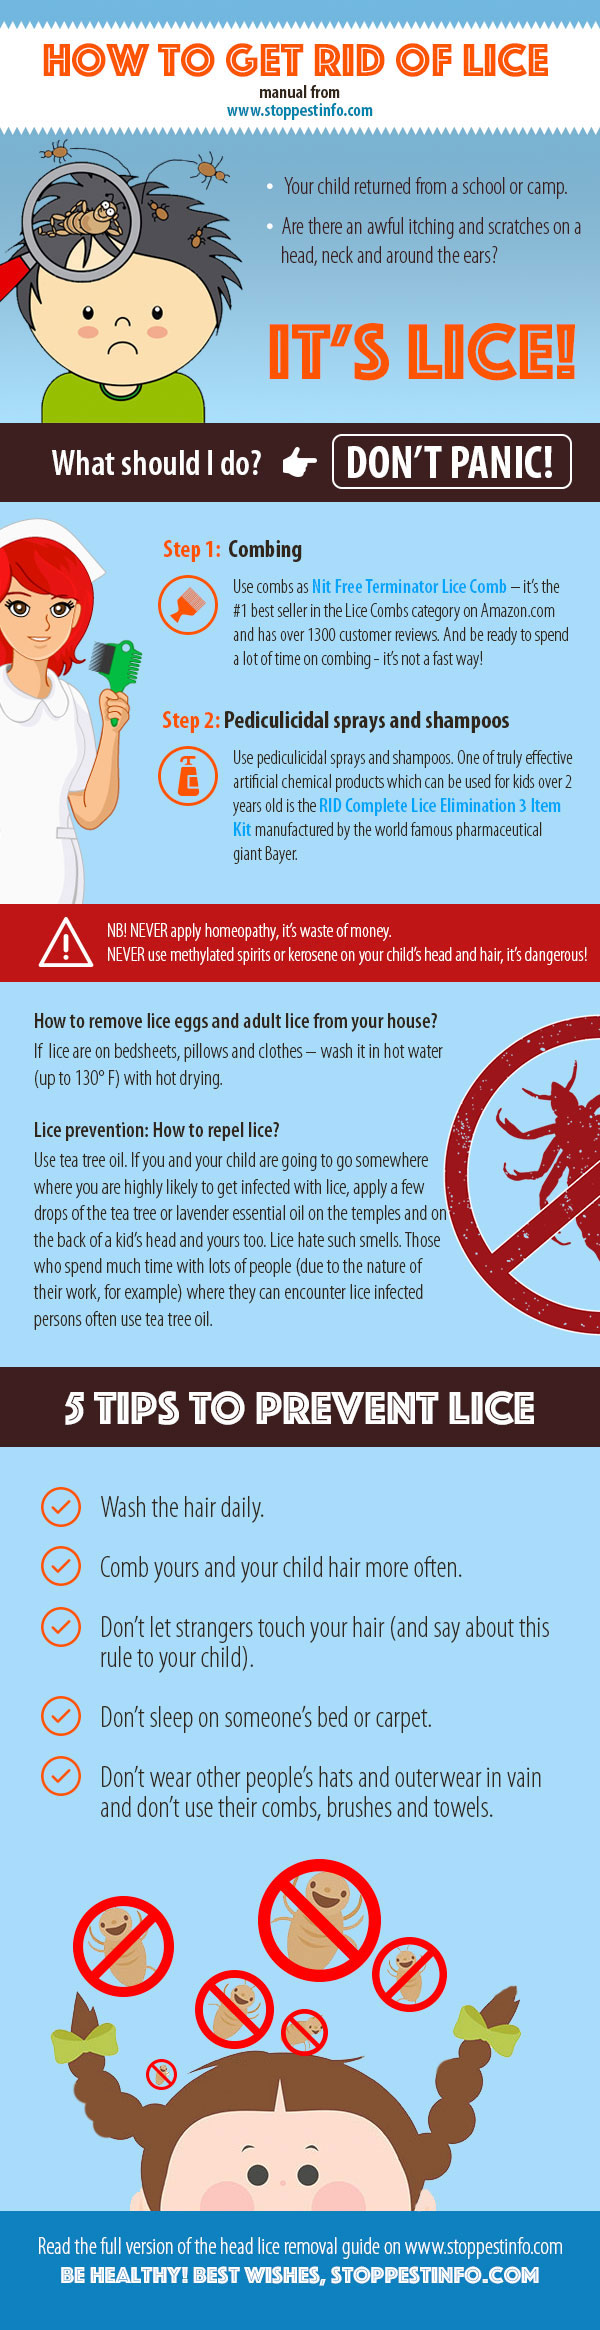 How-to-Get-Rid-of-Lice